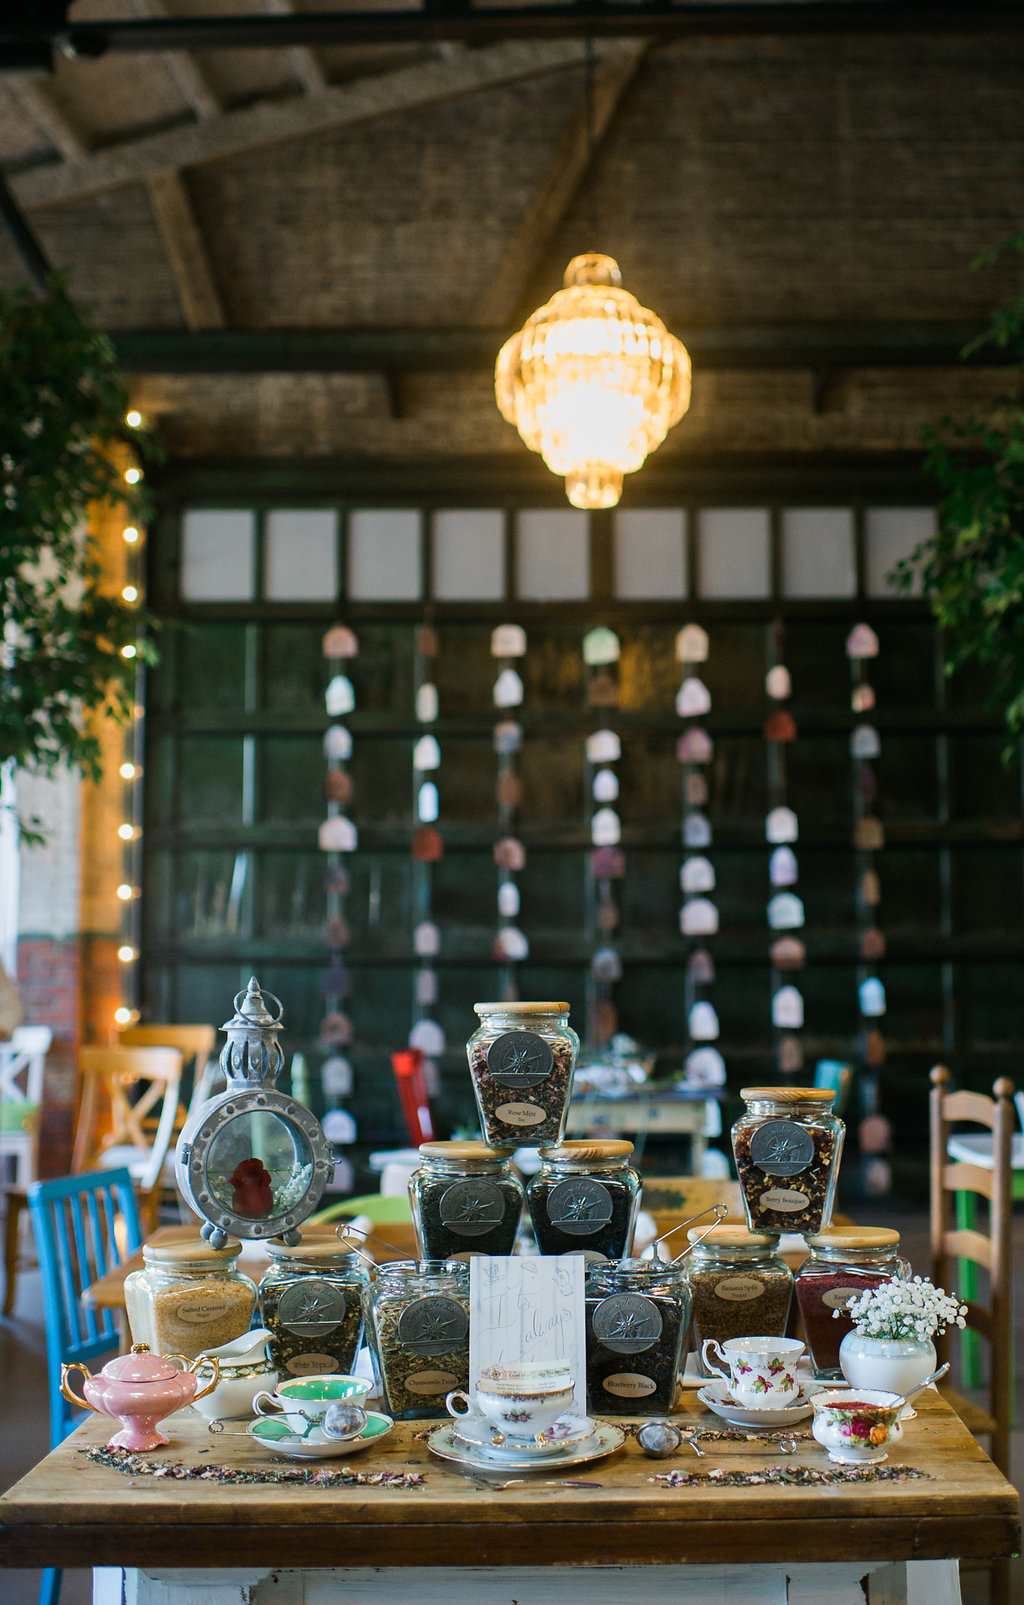 alice-in-wonderland-wedding-rach-lea-photography-rach-loves-troy-photography-ivory-and-beau-bridal-boutique-soho-cafe-savannah-wedding-venue-savannah-weddings-savannah-wedding-planner-sarah-seven-golden-lights-blushing-forever-september-15.jpg